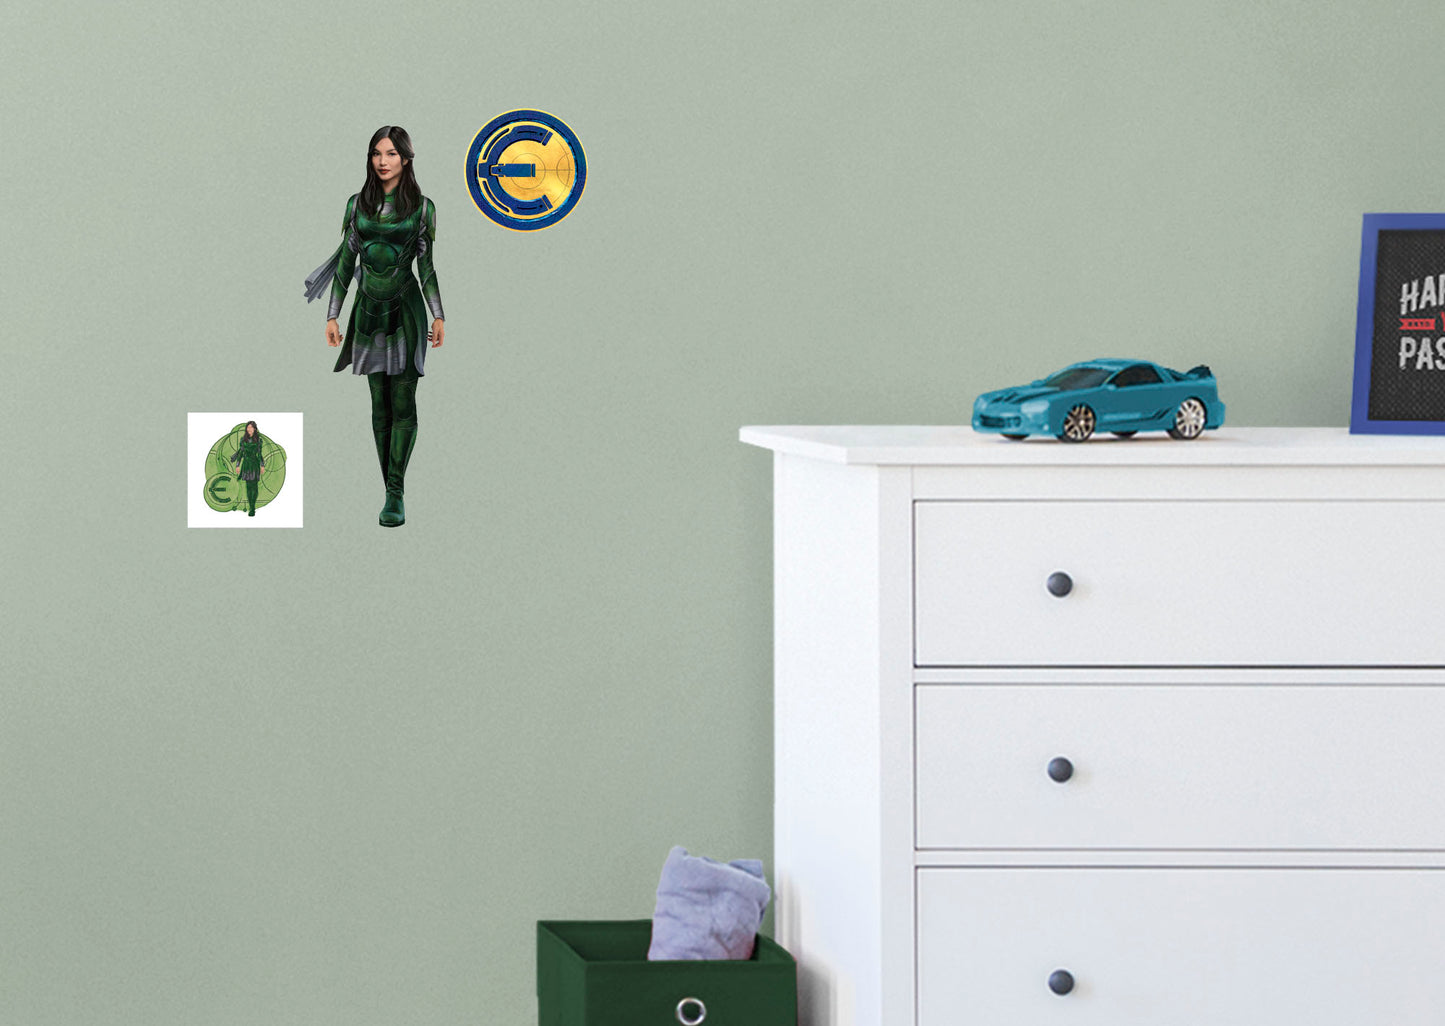 Eternals: Sersi RealBig        - Officially Licensed Marvel Removable Wall   Adhesive Decal